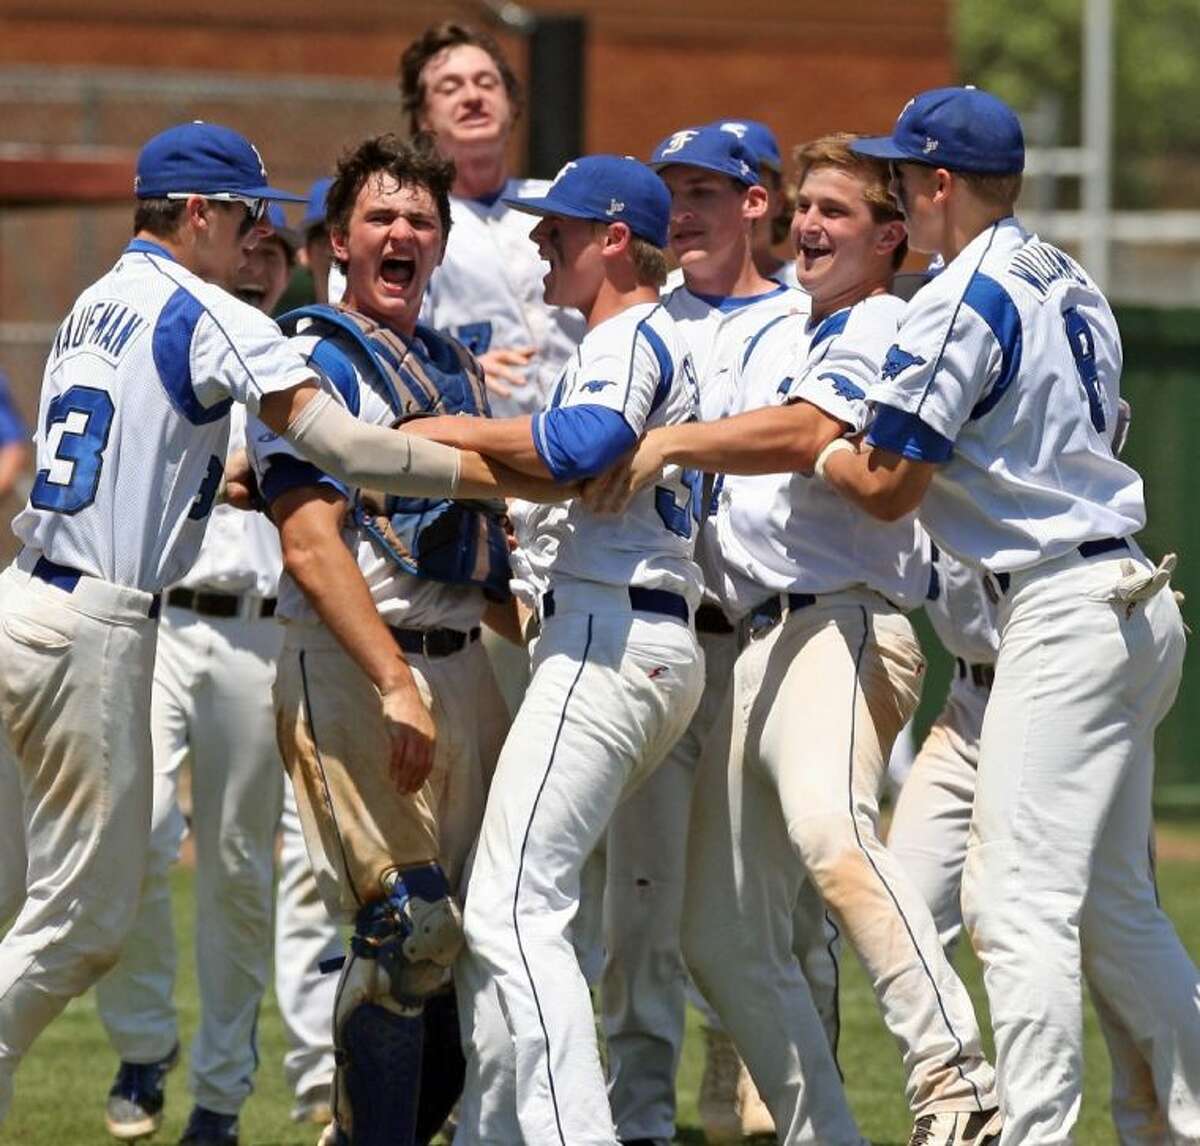 Friendswood players celebrate their win over District 24-4A rival Santa Fe, a win which sends the Mustangs into a regional semifinal matchup with Brenham Thursday and Friday in Katy.